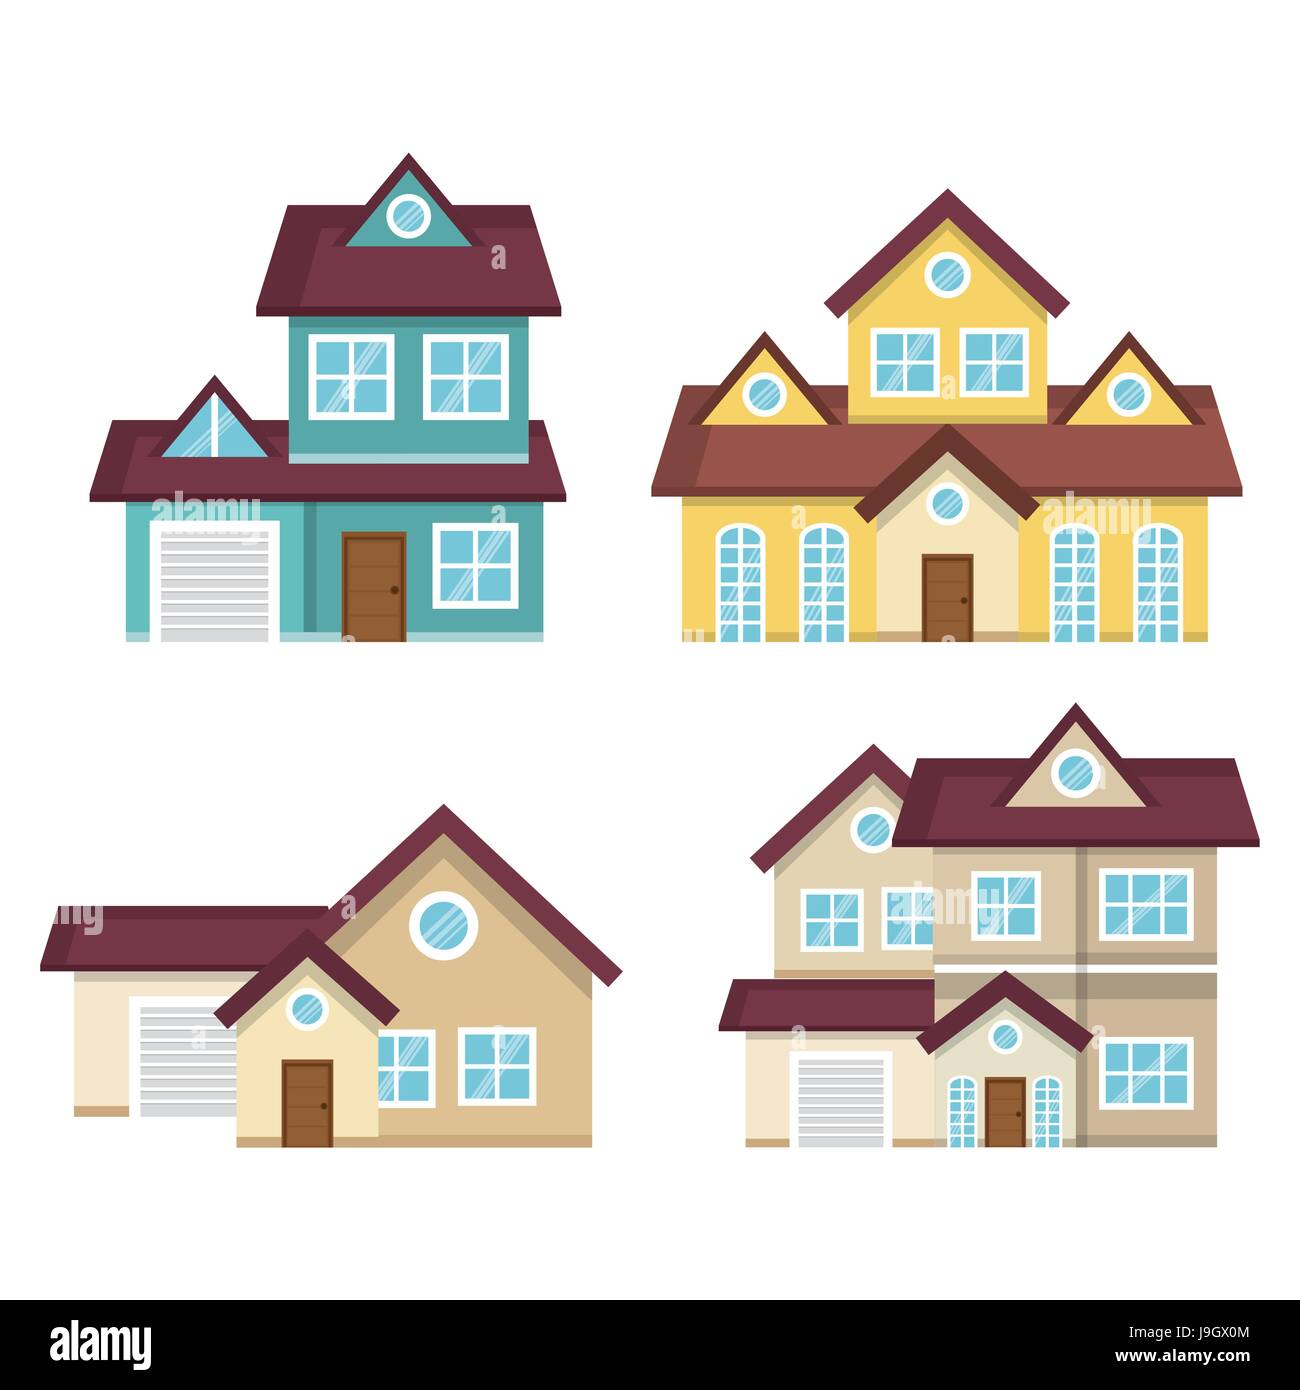 Colorful houses design Stock Vector